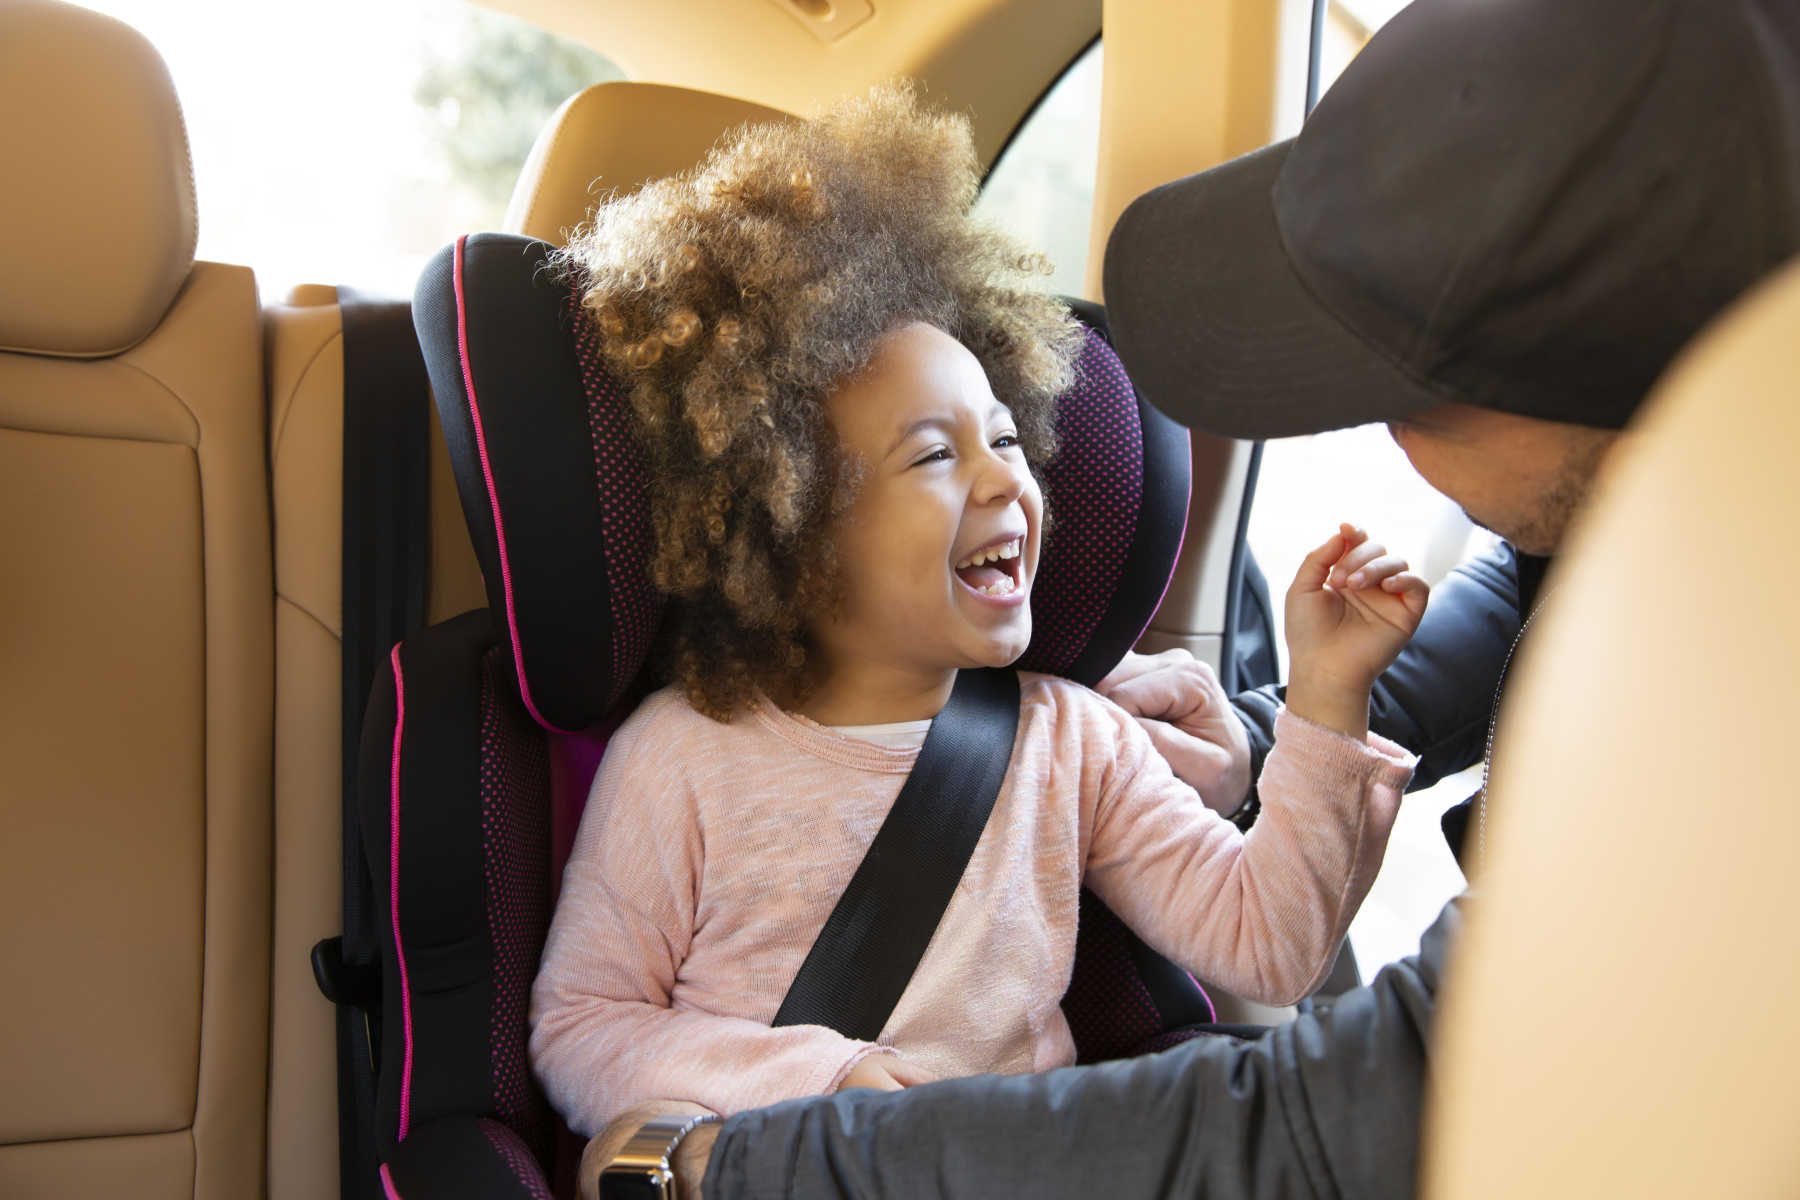 The Best Car Seats For 4 Year Olds, 4 Year Old Need Car Seat